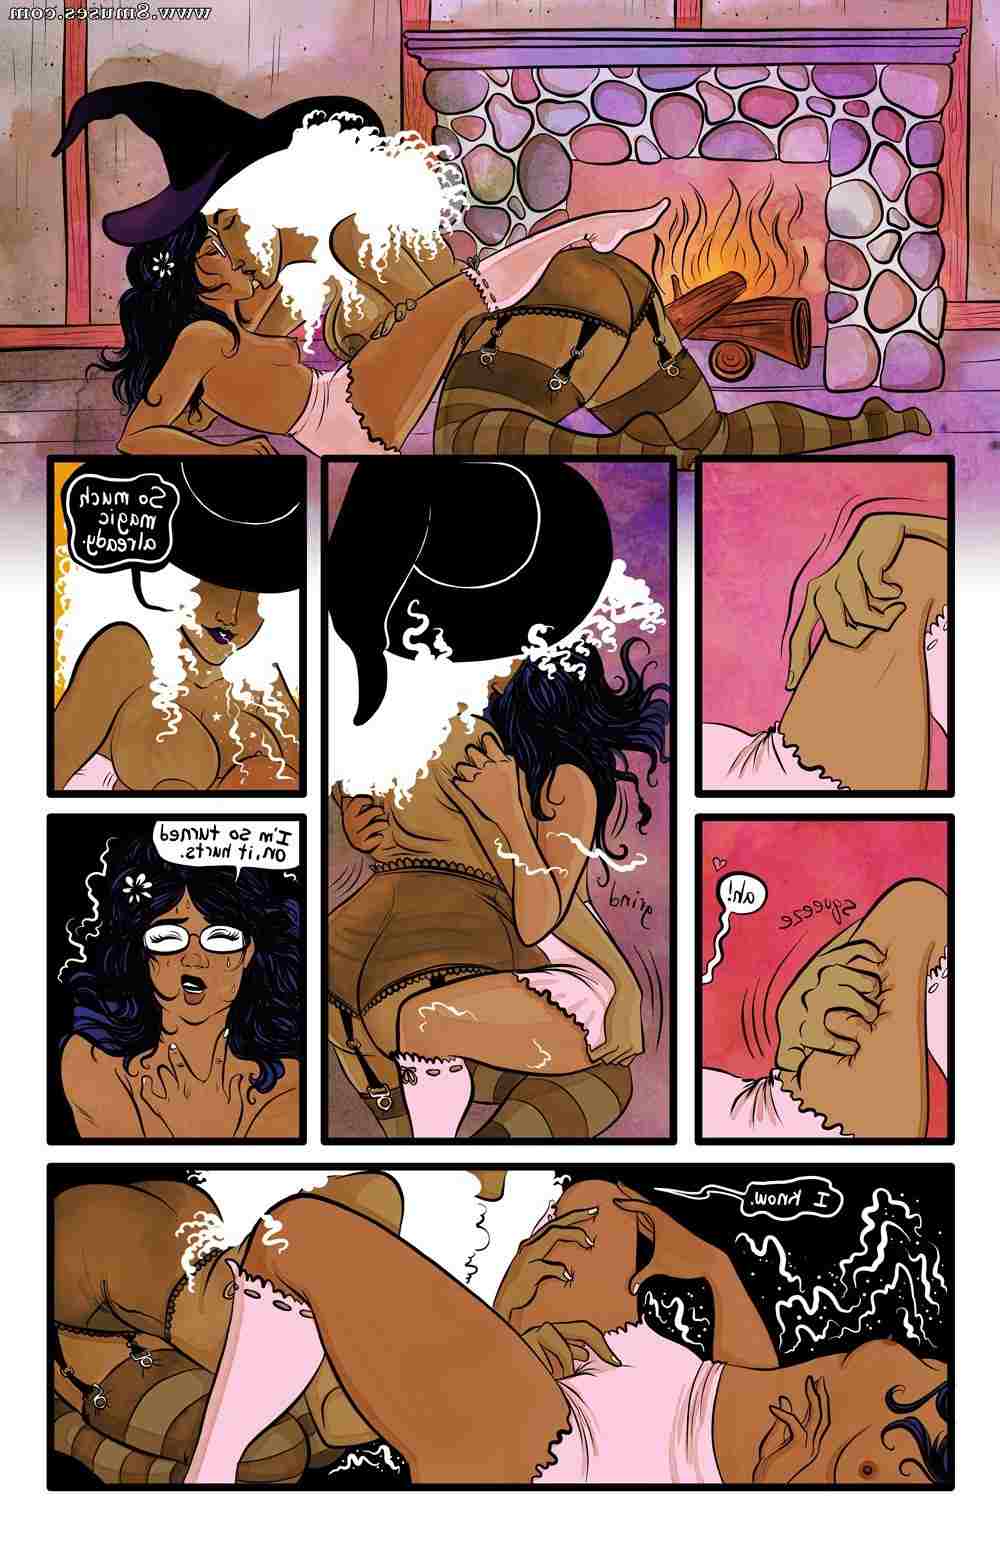 Filthy-Figments-Comics/The-Witch The_Witch__8muses_-_Sex_and_Porn_Comics_10.jpg